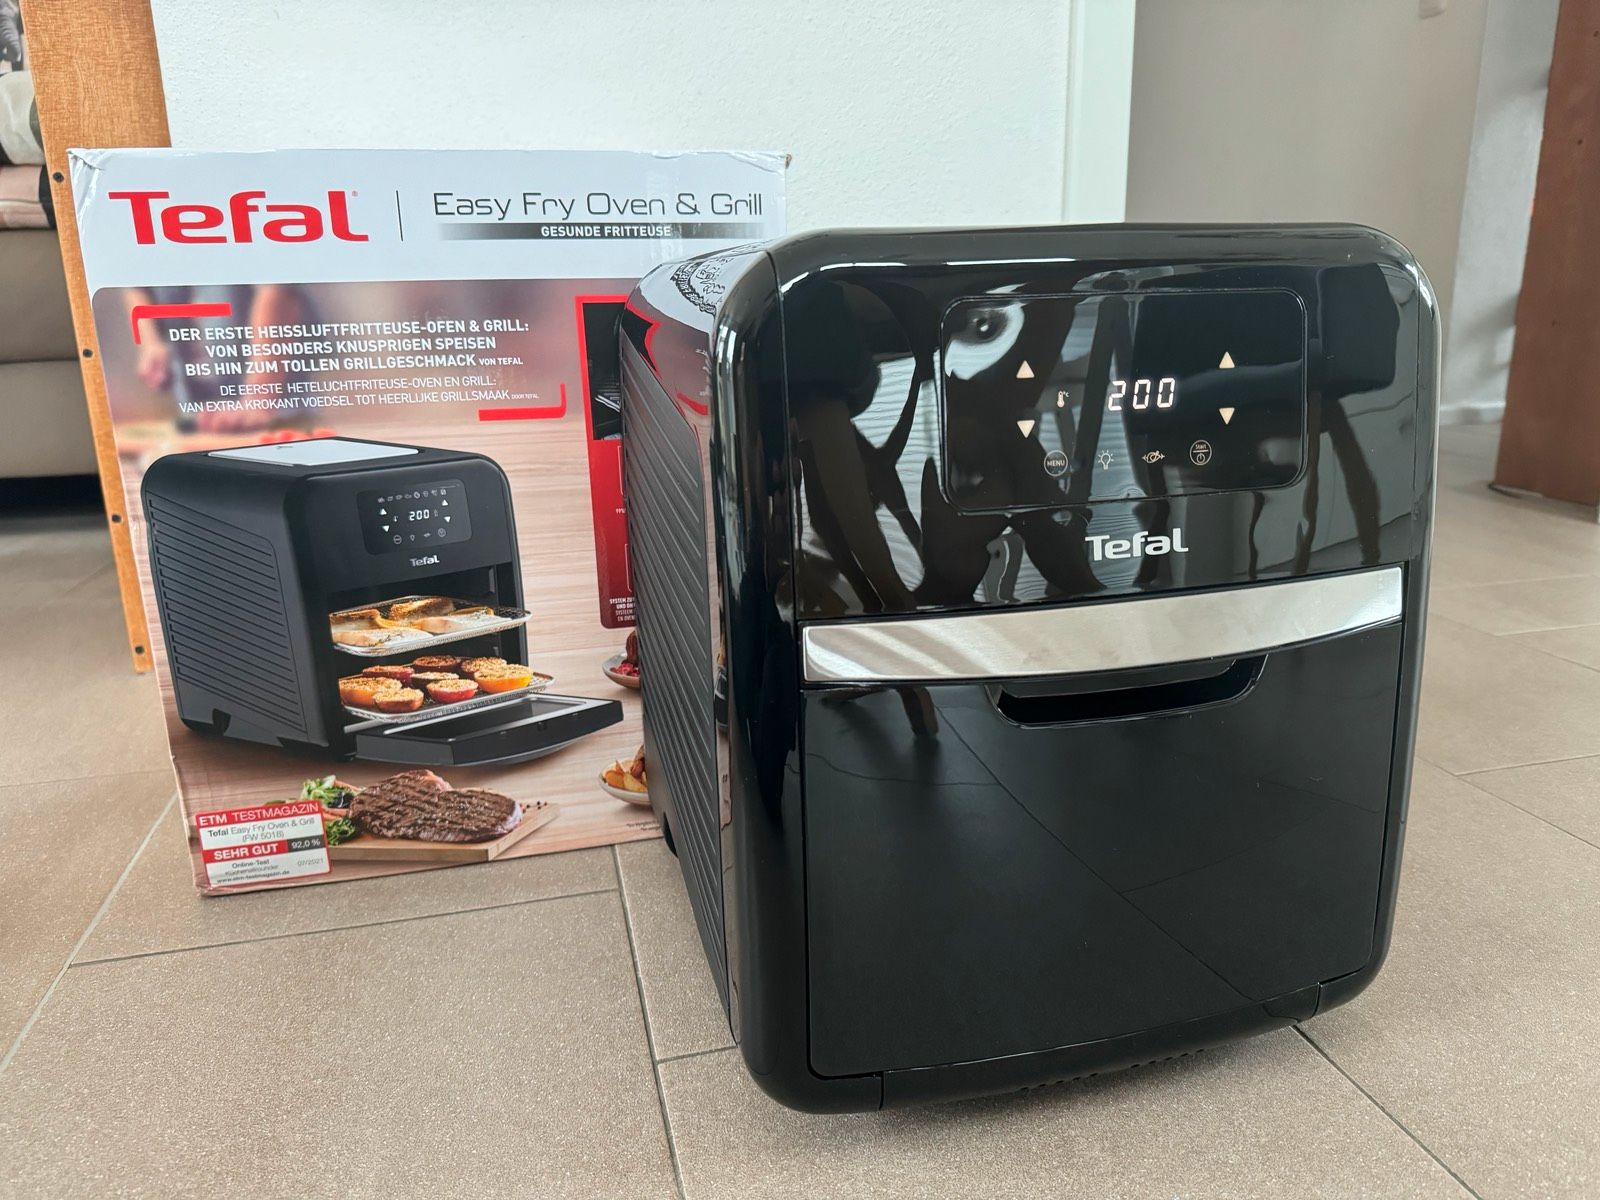 Tefal FW5018 Easy Fry Oven & Grill Heißluftfritteuse